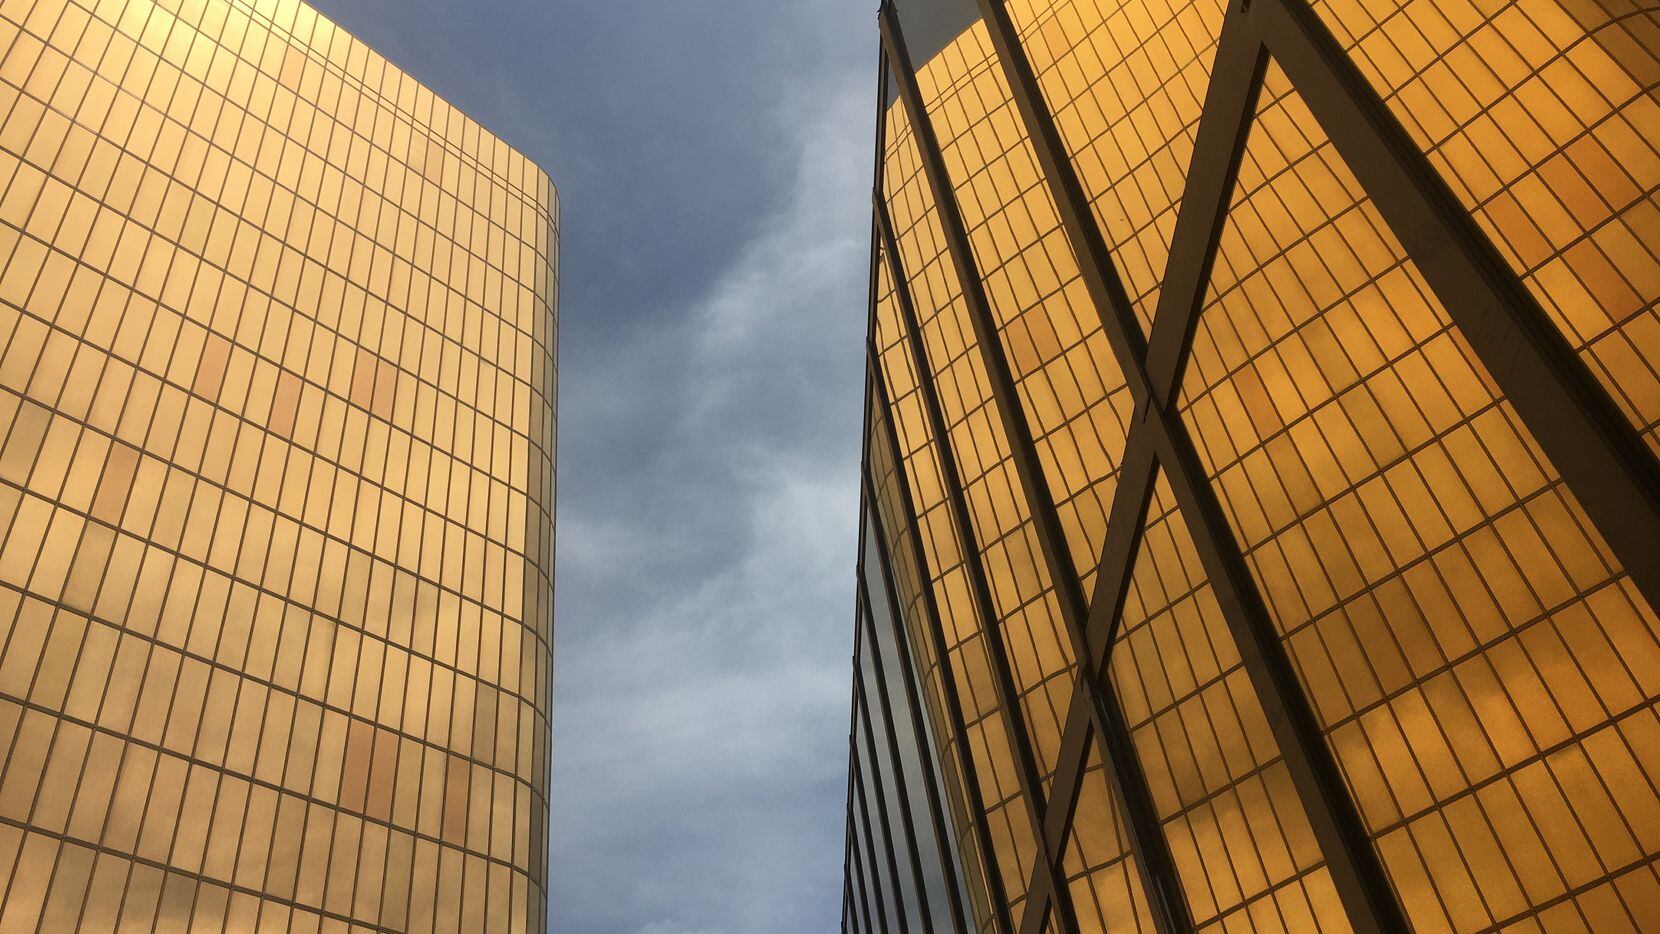 The golden facades of the Campbell Centre, the landmark glowing ingots, reflected in...